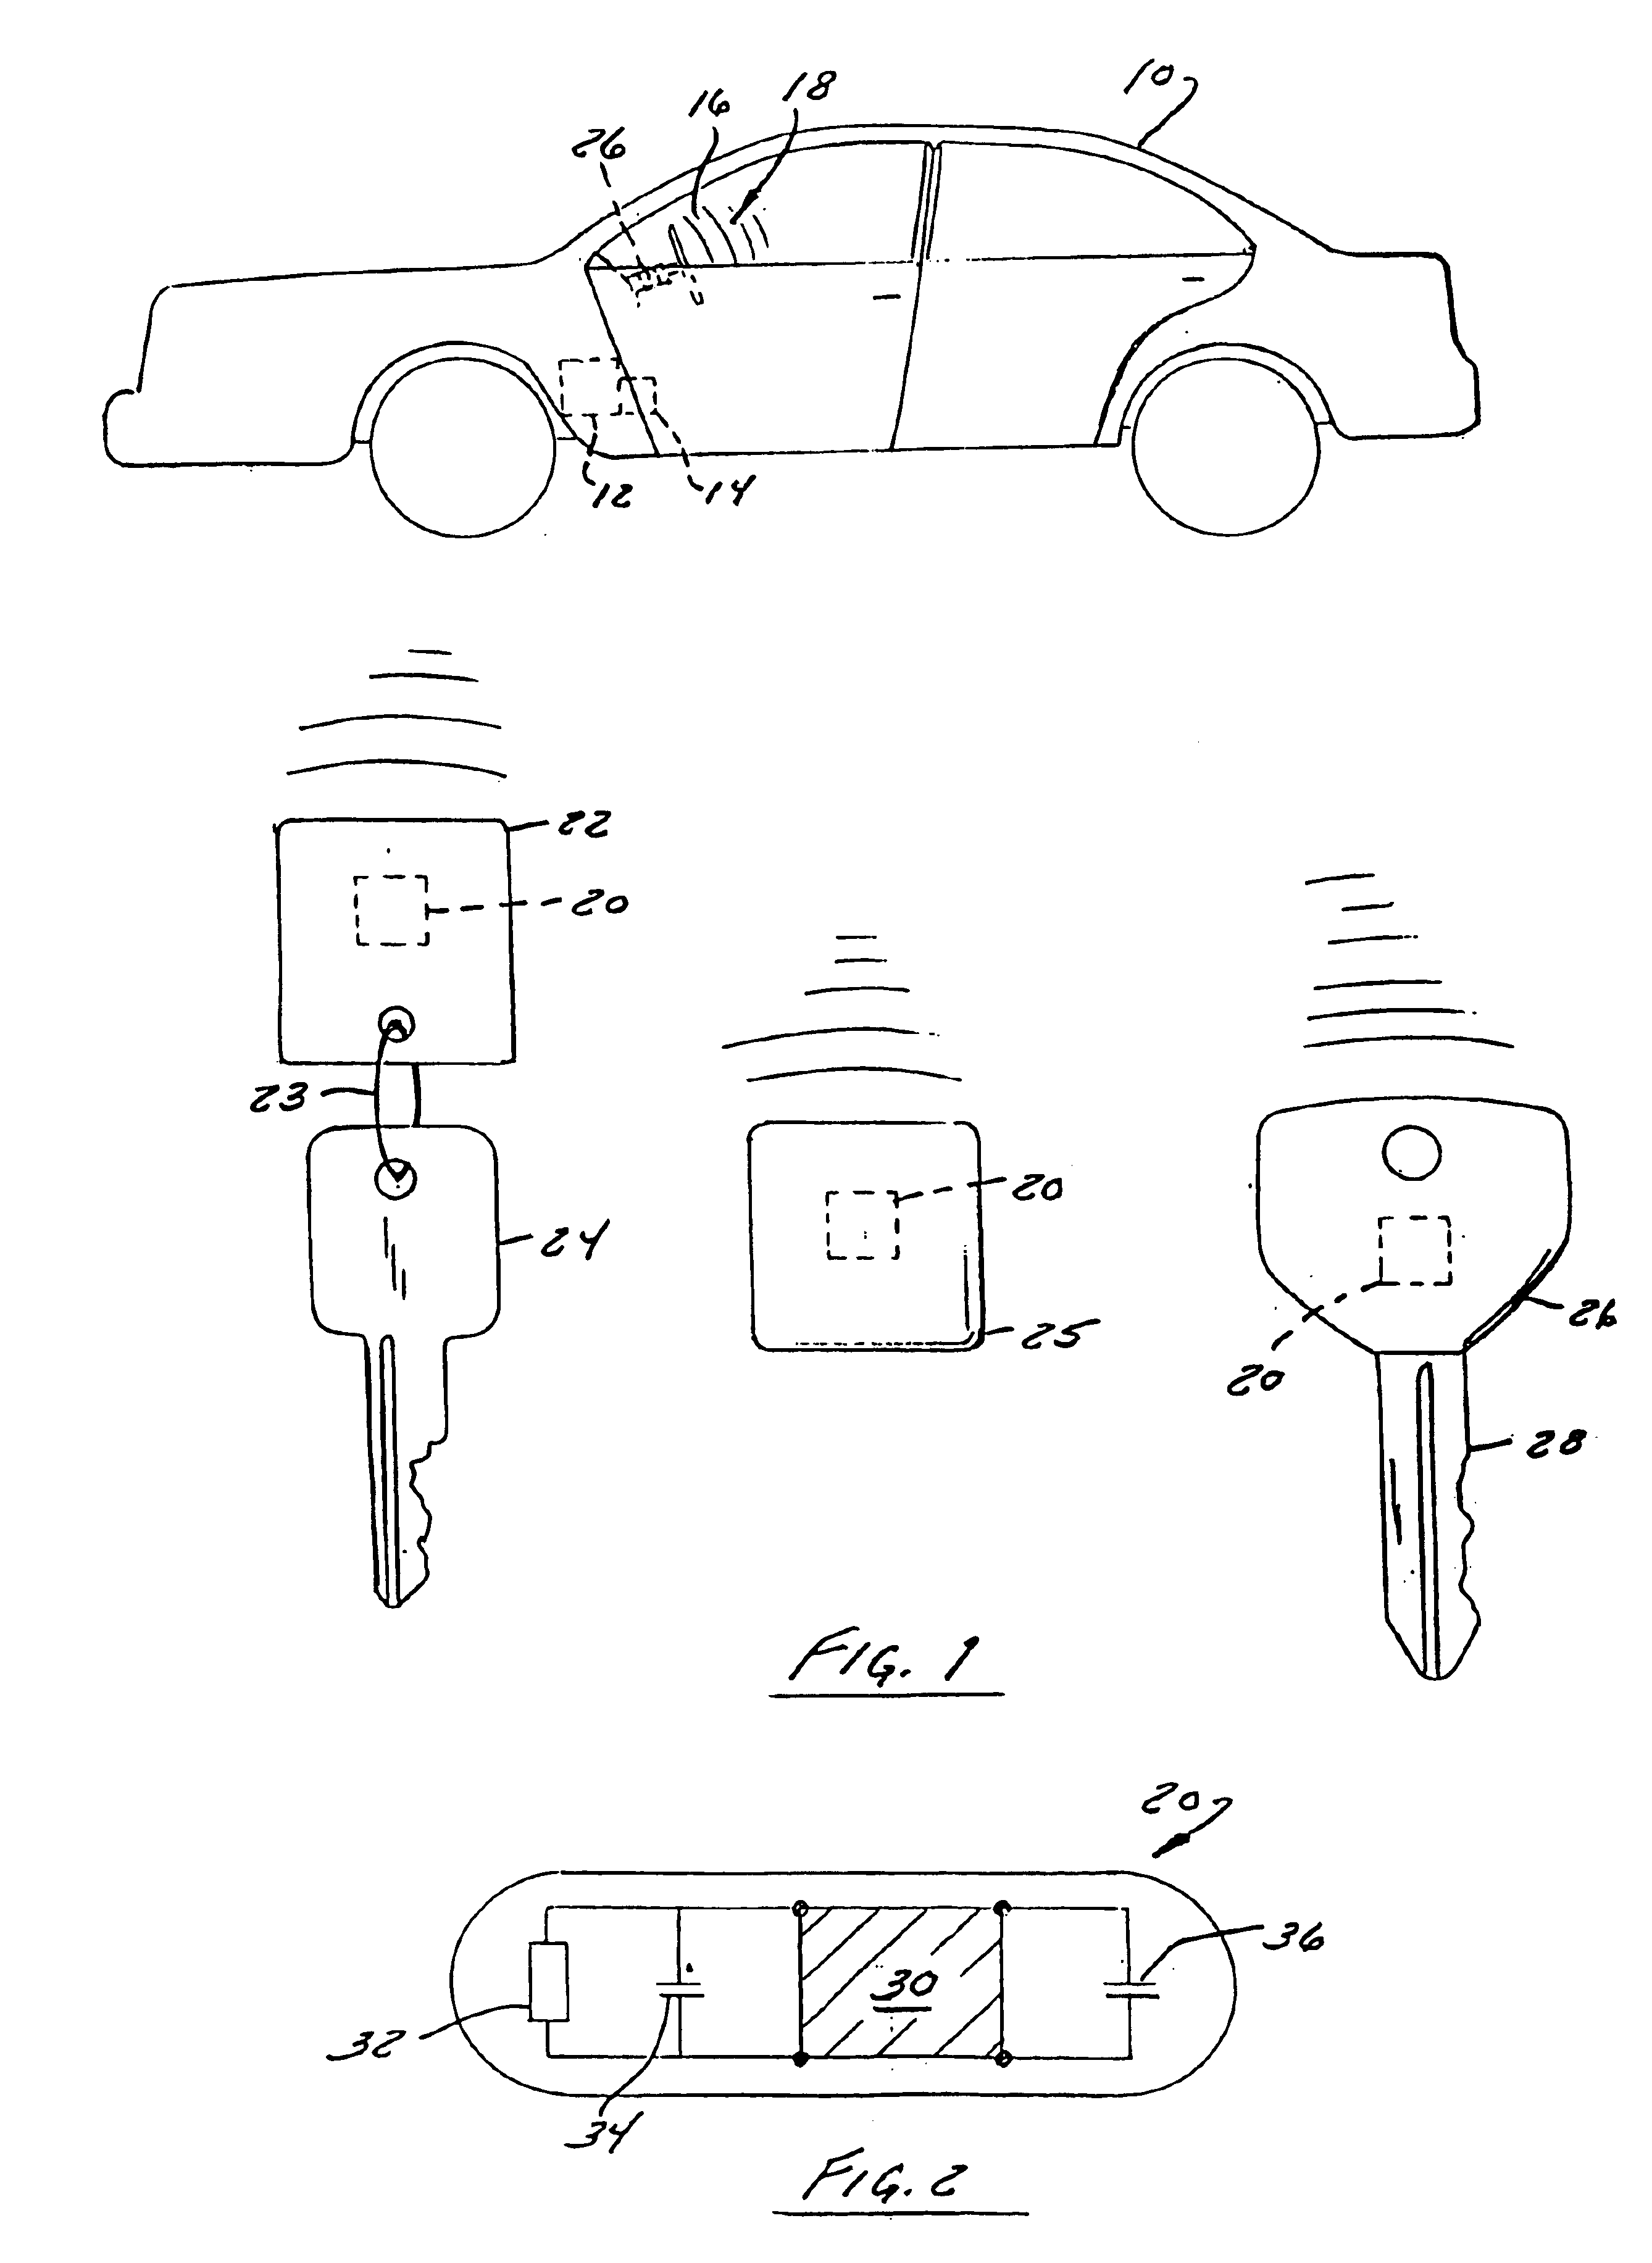 Transponder communication and control system for a vehicle